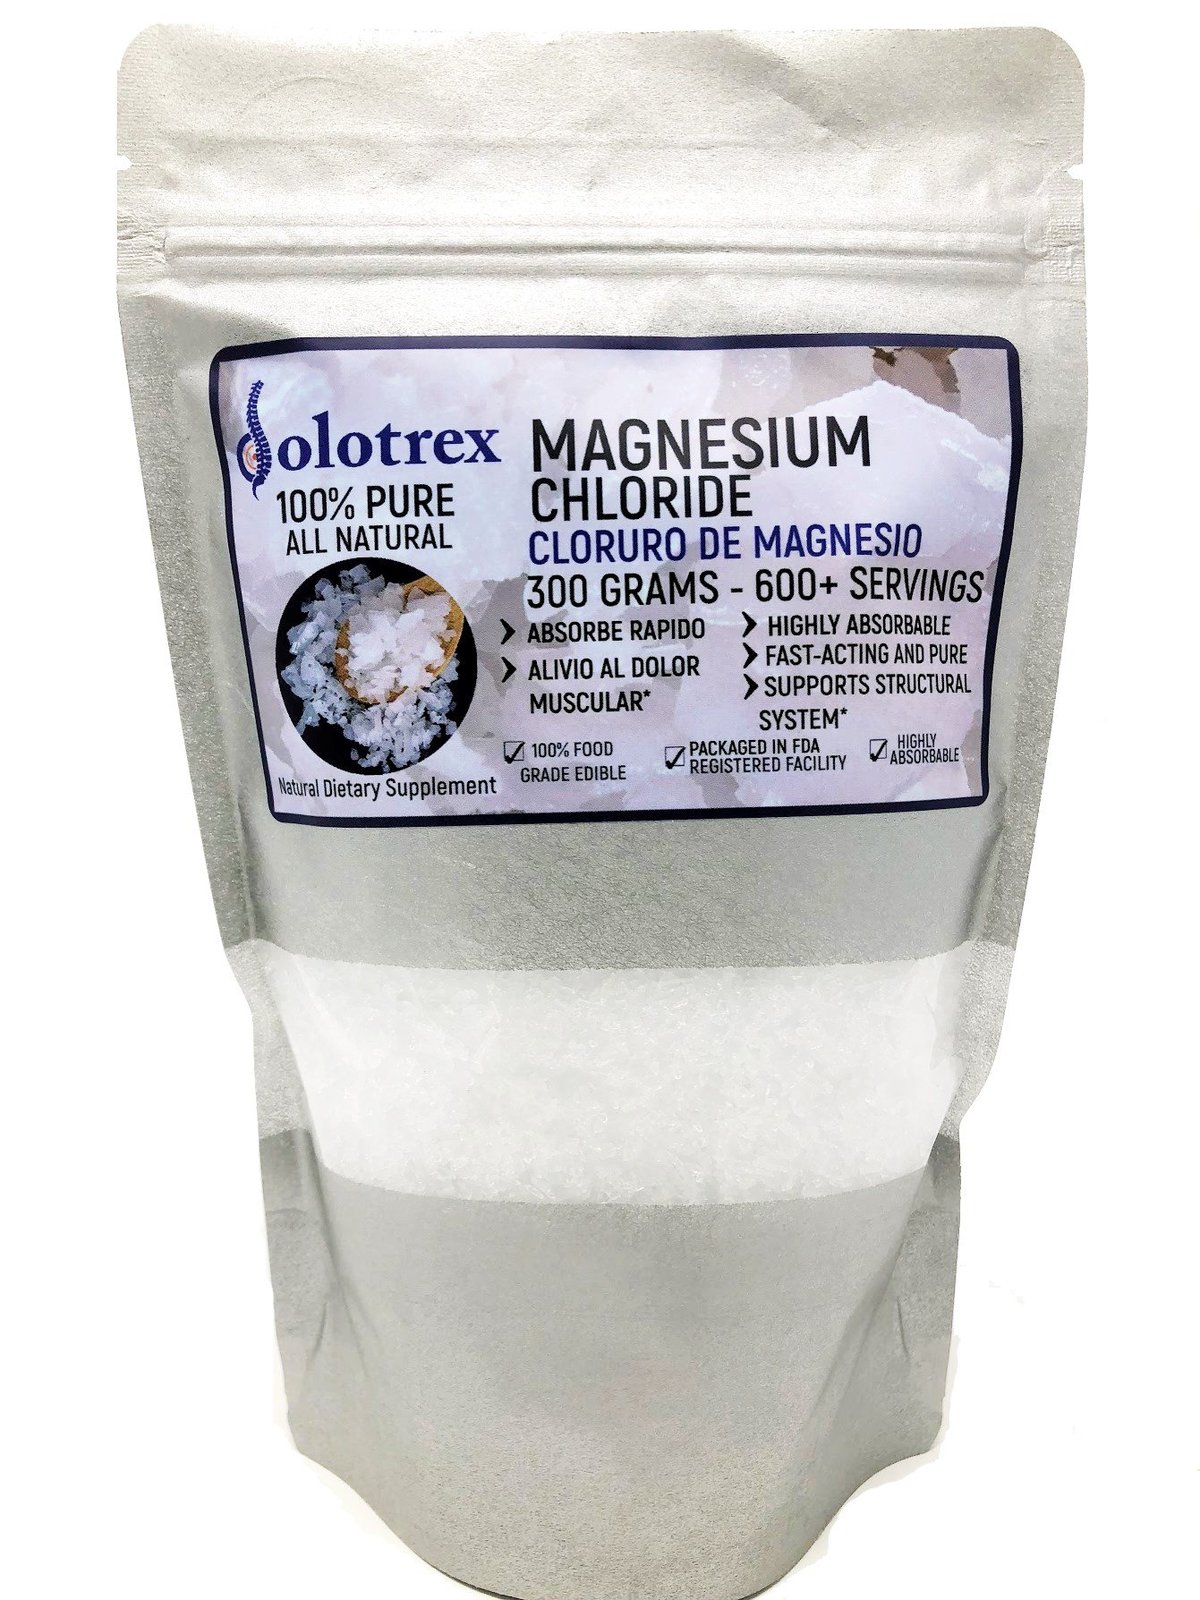 Cloruro de Magnesio Magnesium Chloride Over 600 Servings (0.66 Lbs) of 100% Pure